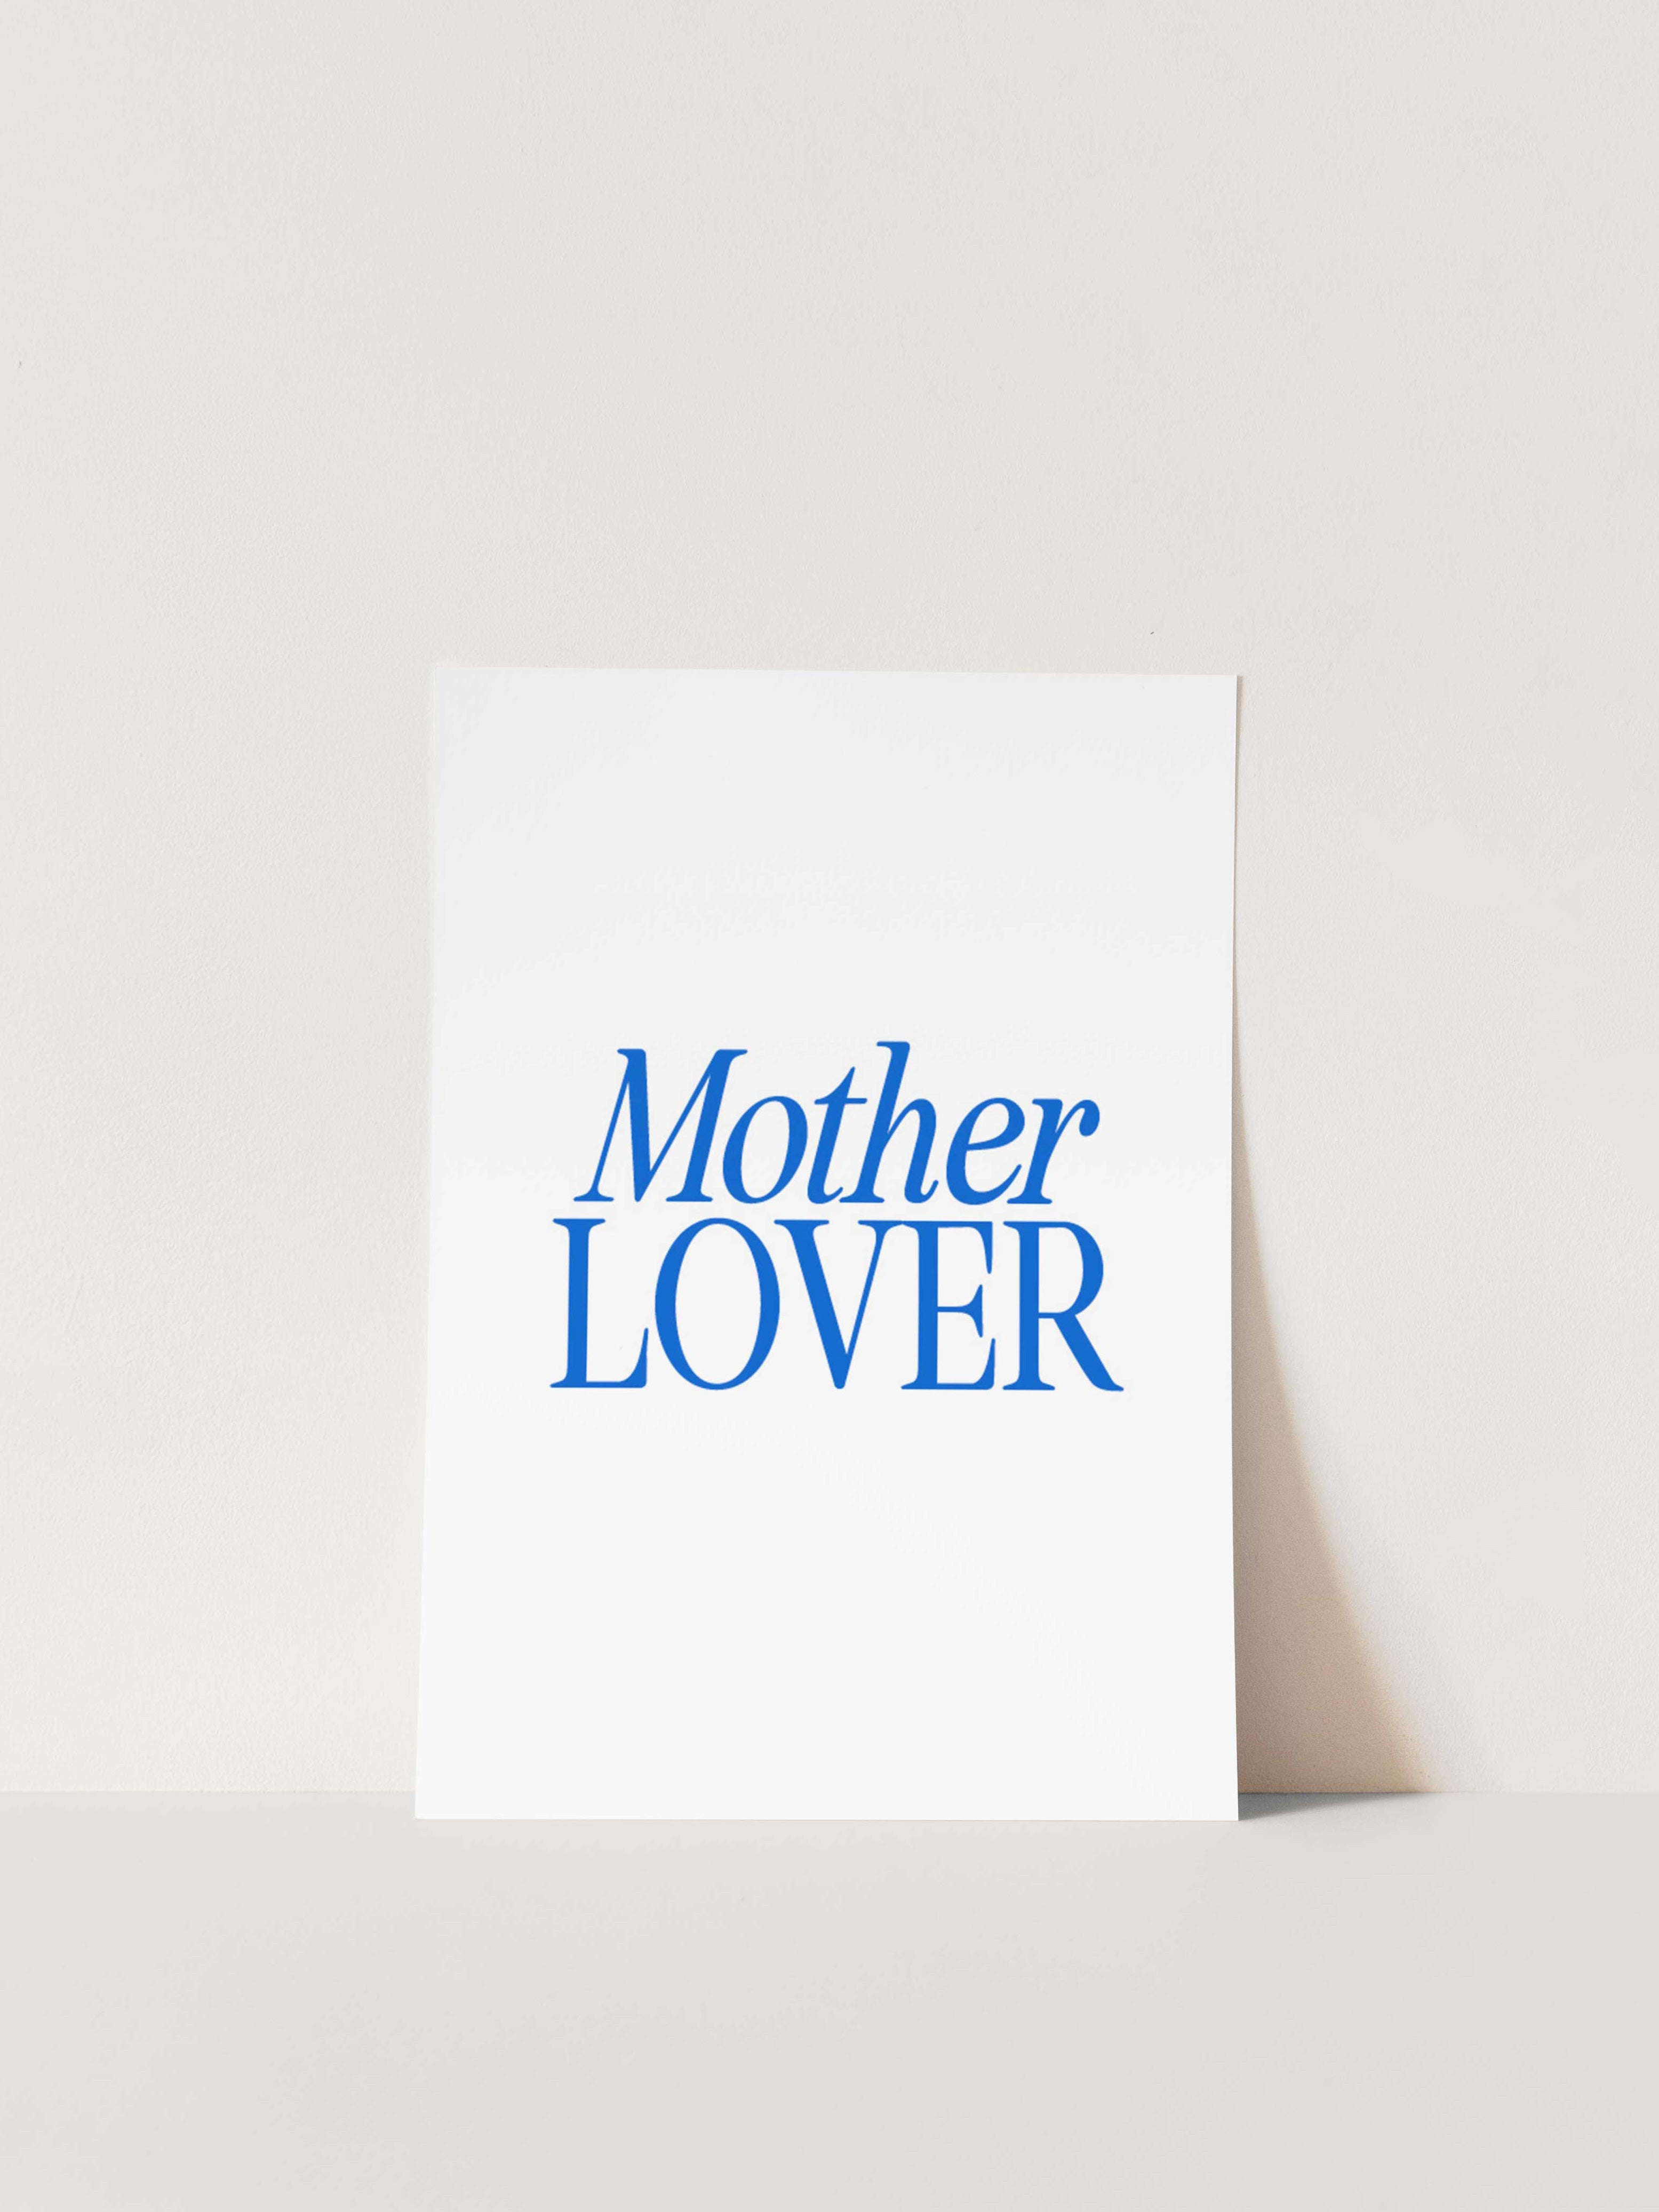 Mother Lover Card by La Terre Press